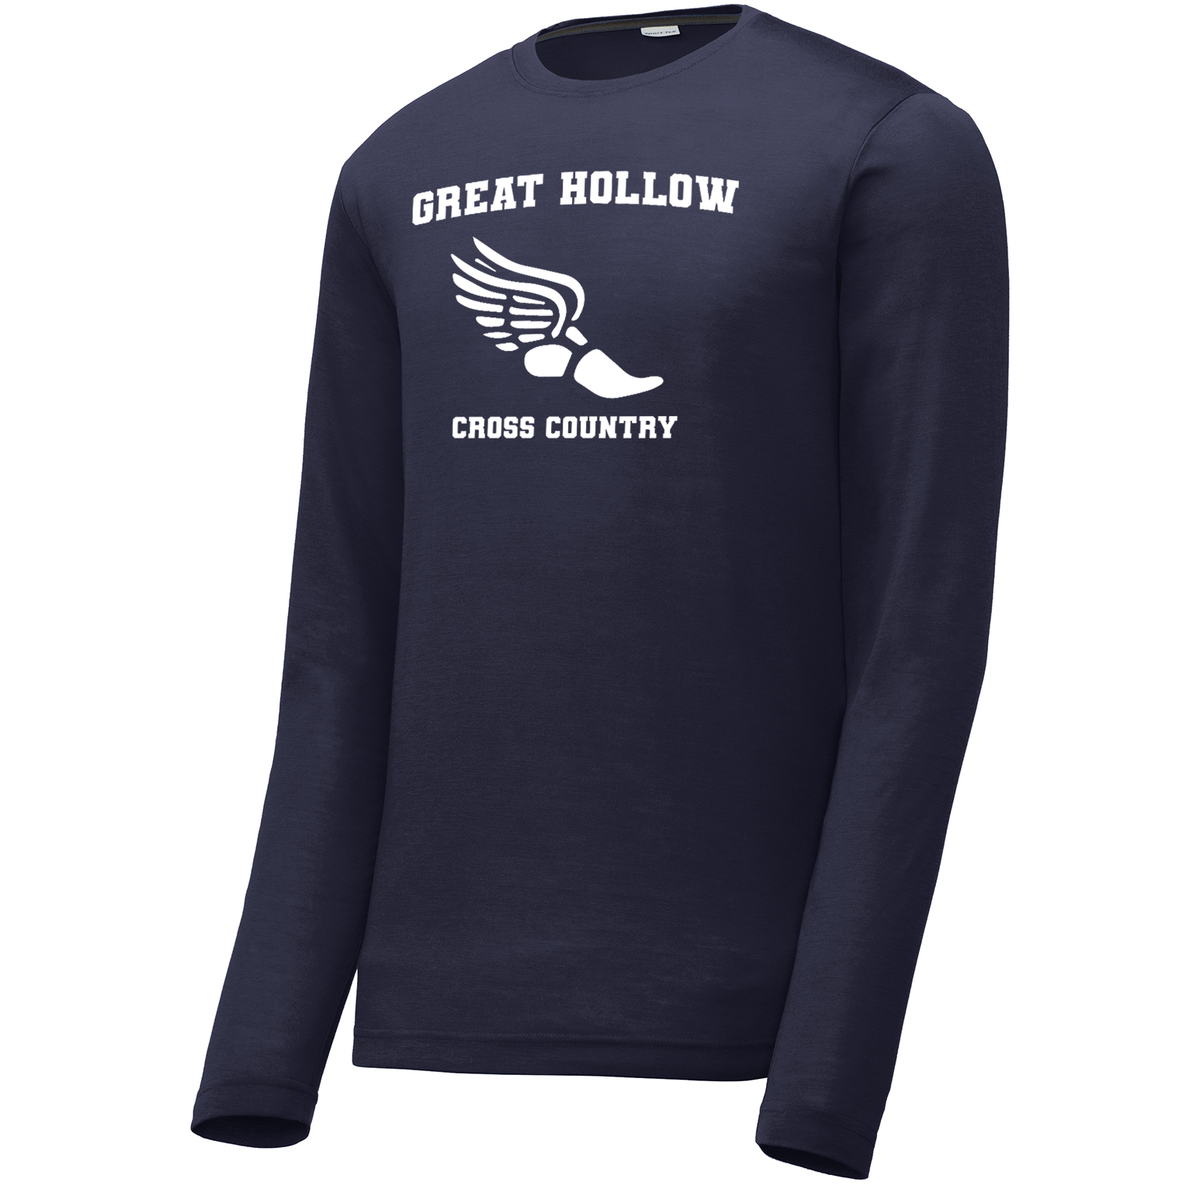 Great Hollow Cross Country Long Sleeve CottonTouch Performance Shirt